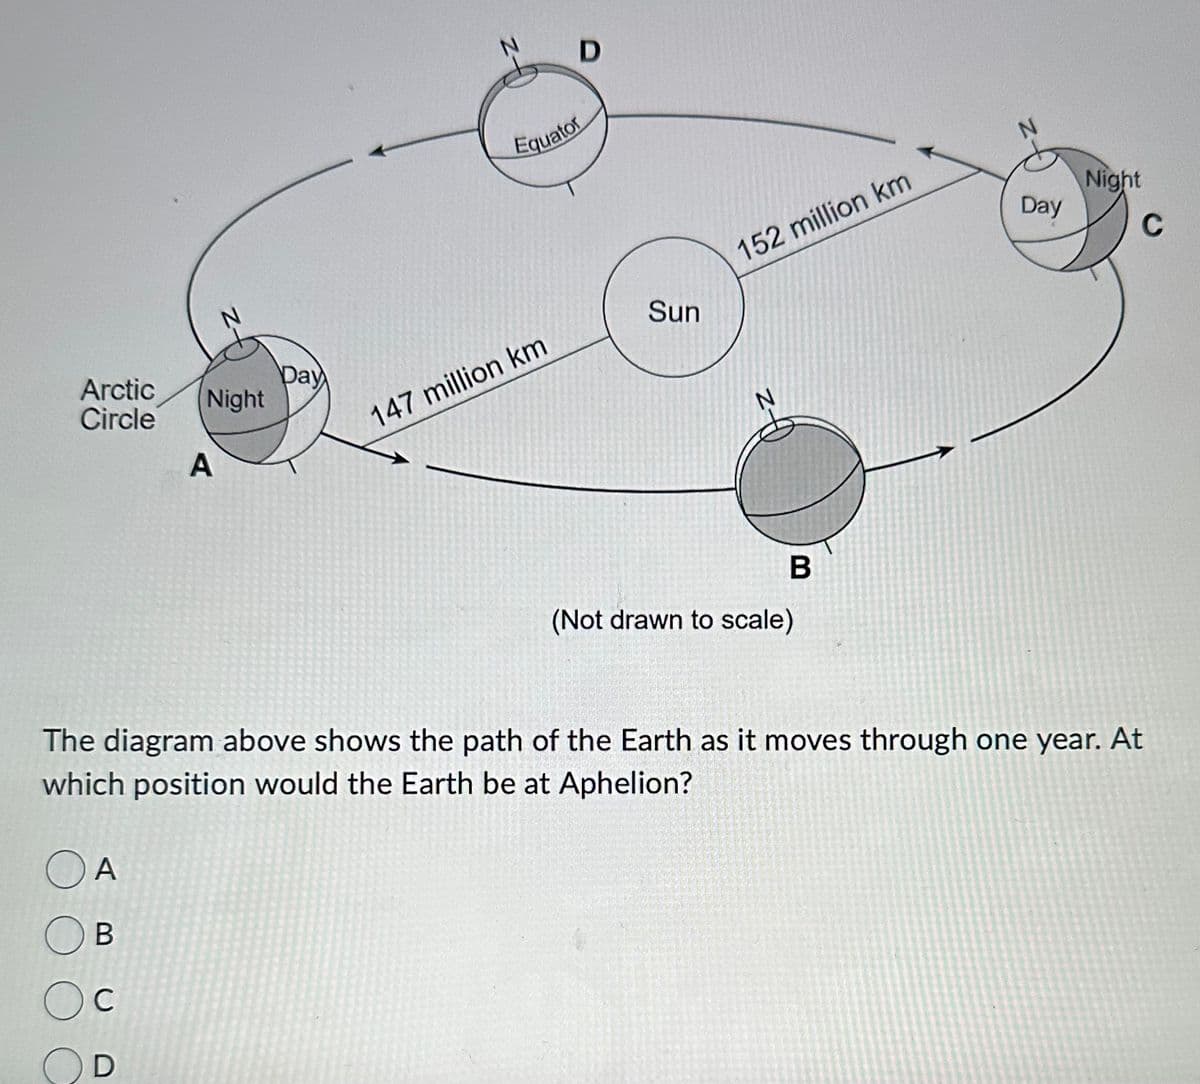 Arctic Night
Circle
N
A
OA
OB
Ос
D
pay
D
Equator
147 million km
Sun
152 million km
N
B
(Not drawn to scale)
N
Day
Night
C
The diagram above shows the path of the Earth as it moves through one year. At
which position would the Earth be at Aphelion?